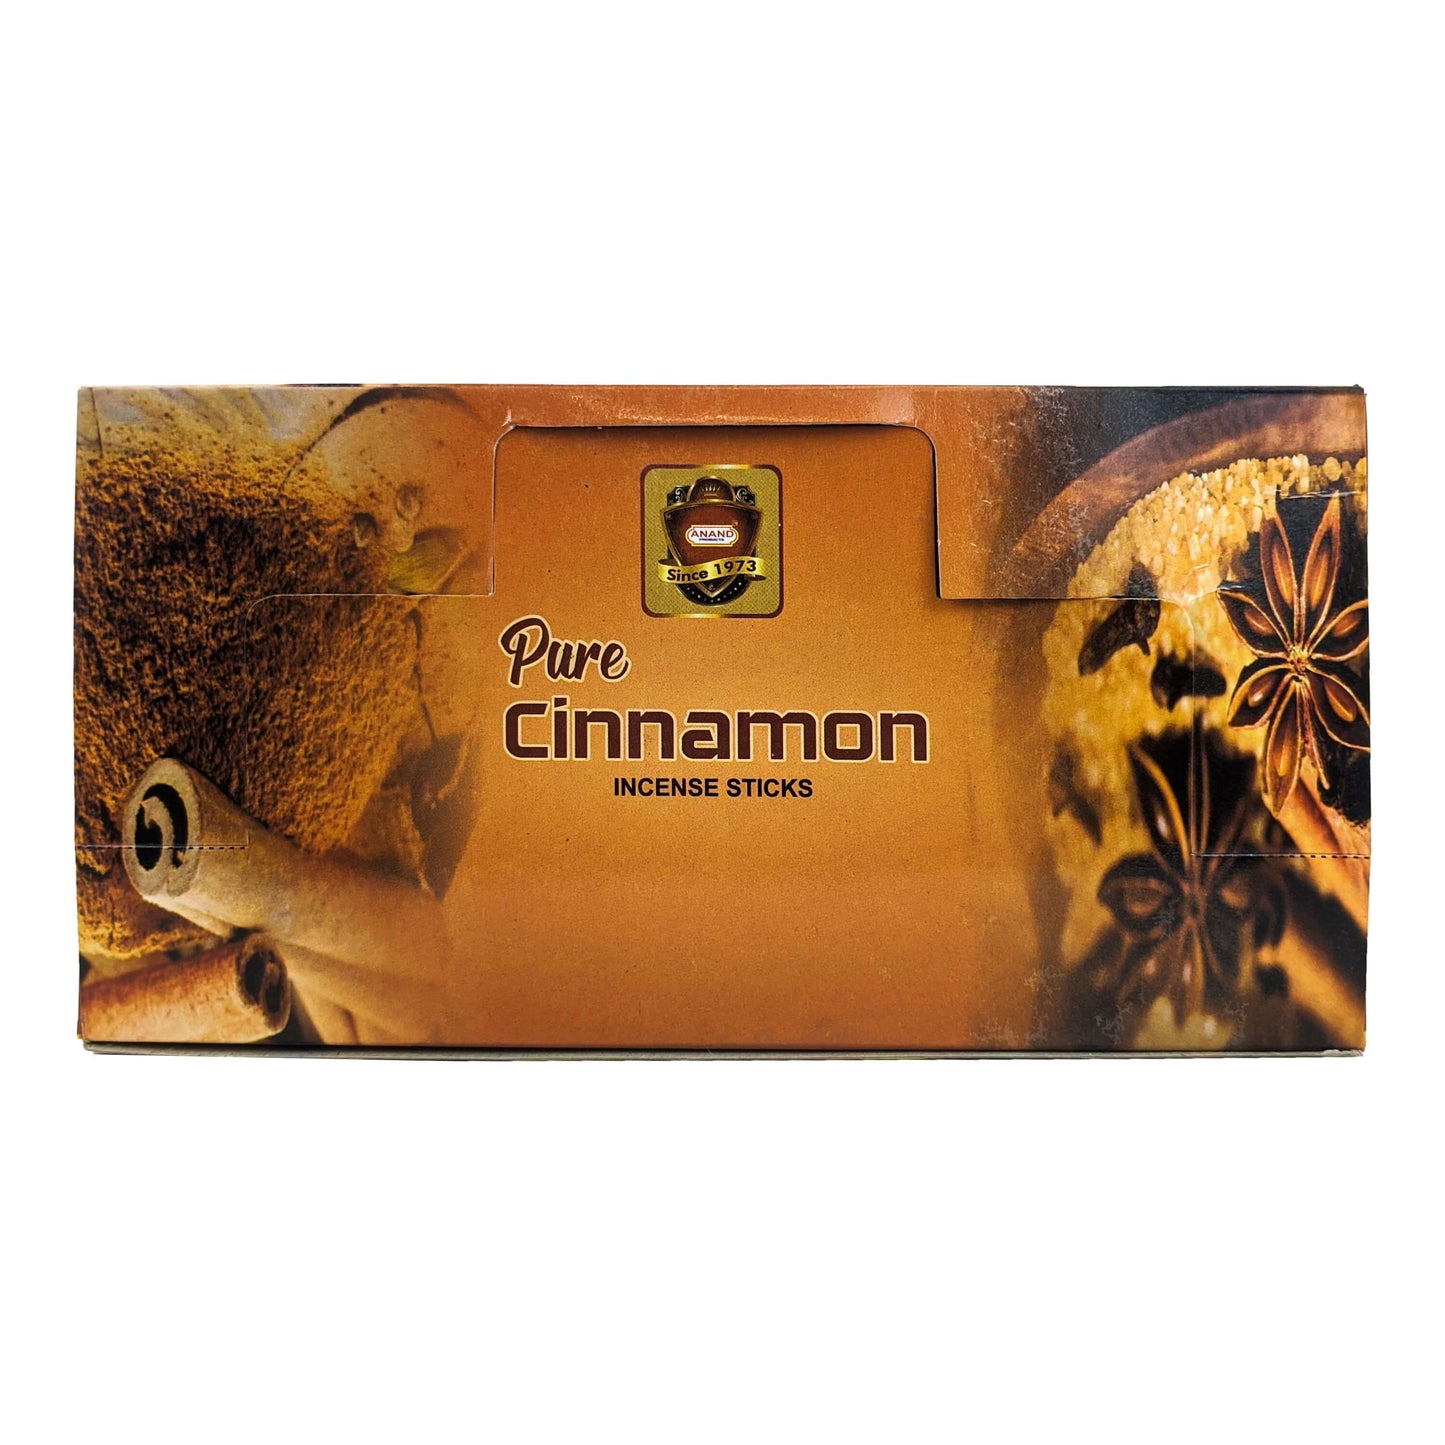 Anand Pure Cinnamon Incense Sticks, 15g Pack